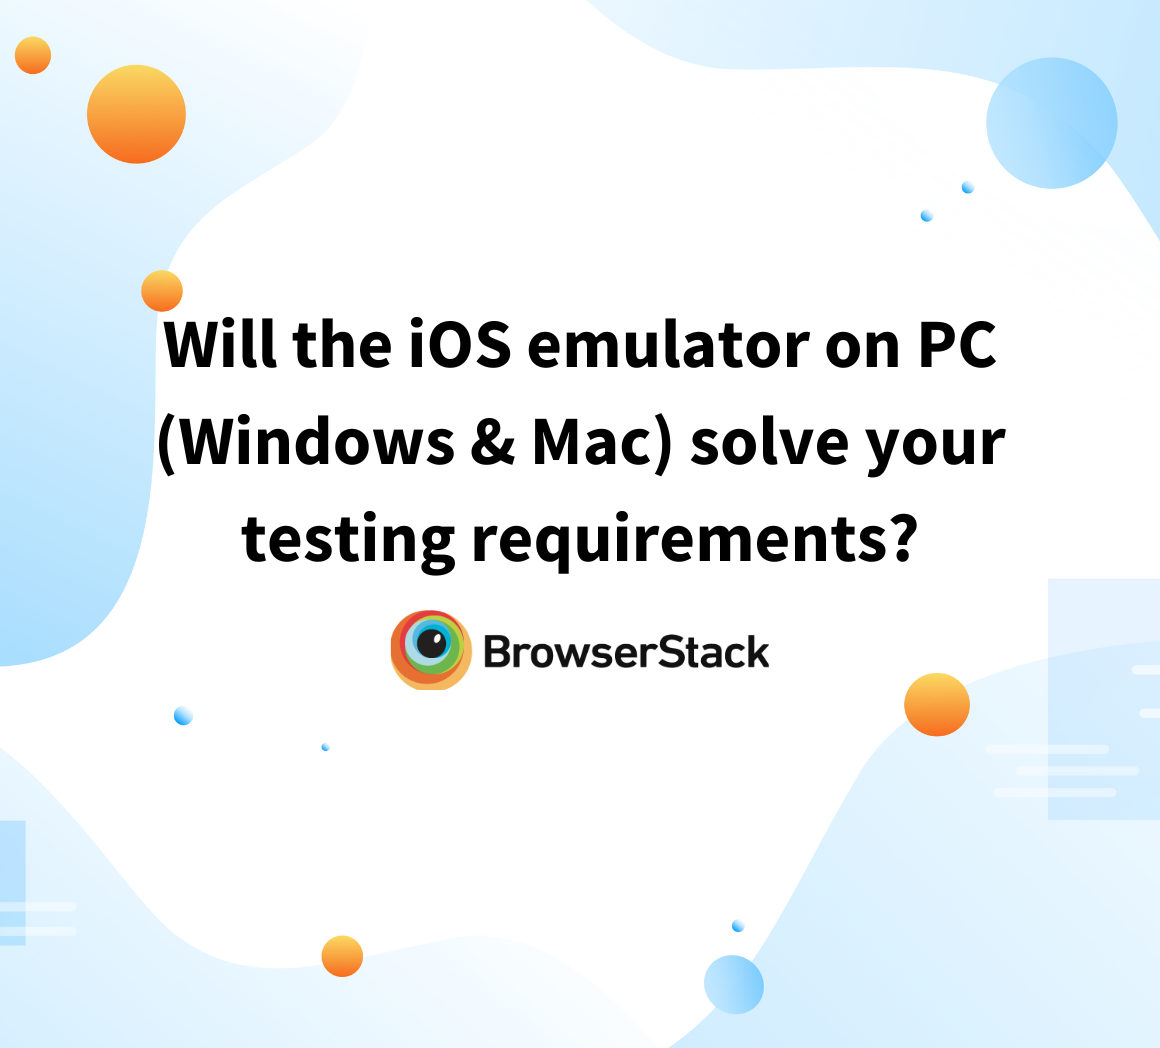 Will the iOS emulator on PC (Windows & Mac) solve your testing requirements?